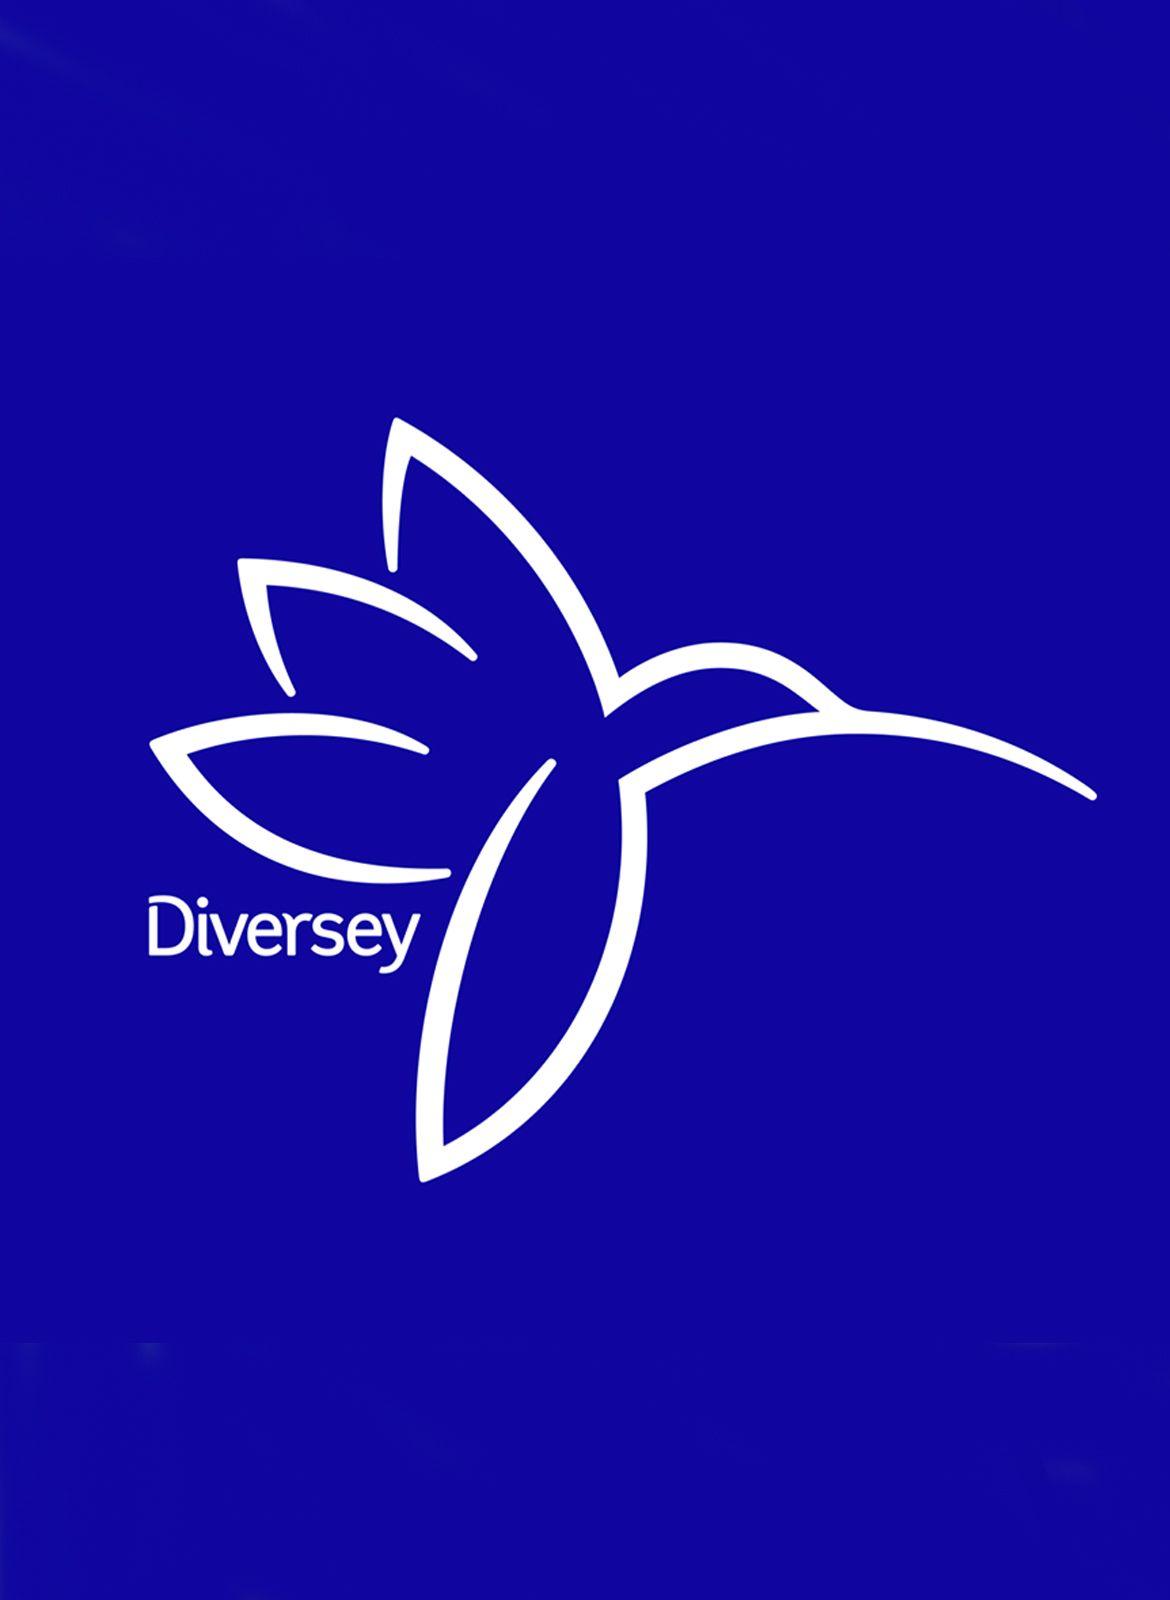 Diversey Logo - Launch of new corporate identity | Mulberry Marketing Communications